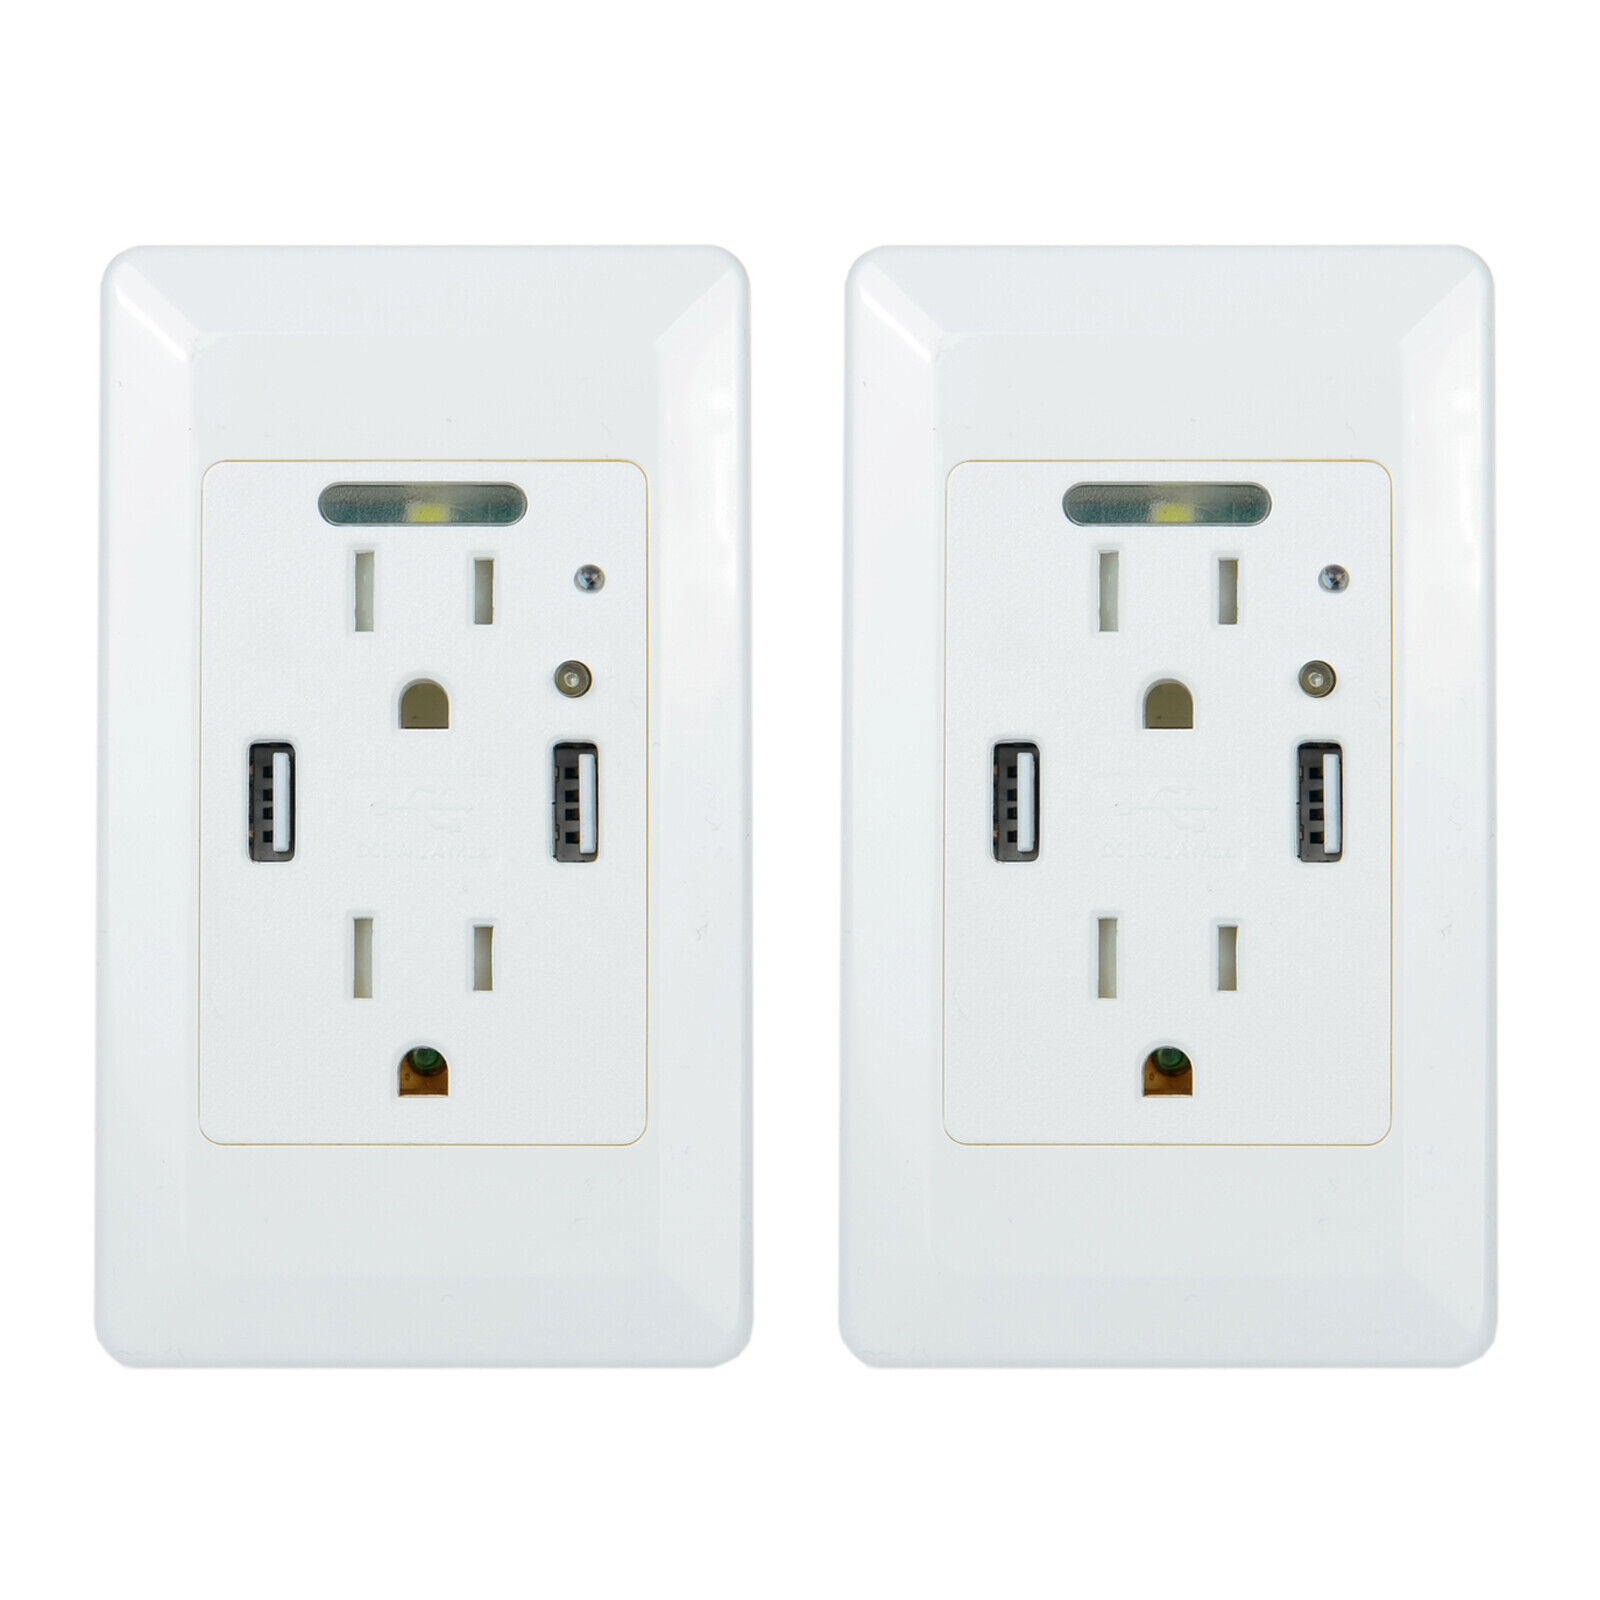 2x Wall Socket Charger Dual USB Port AC Power Plate Panel 4.2A Receptacle Outlet